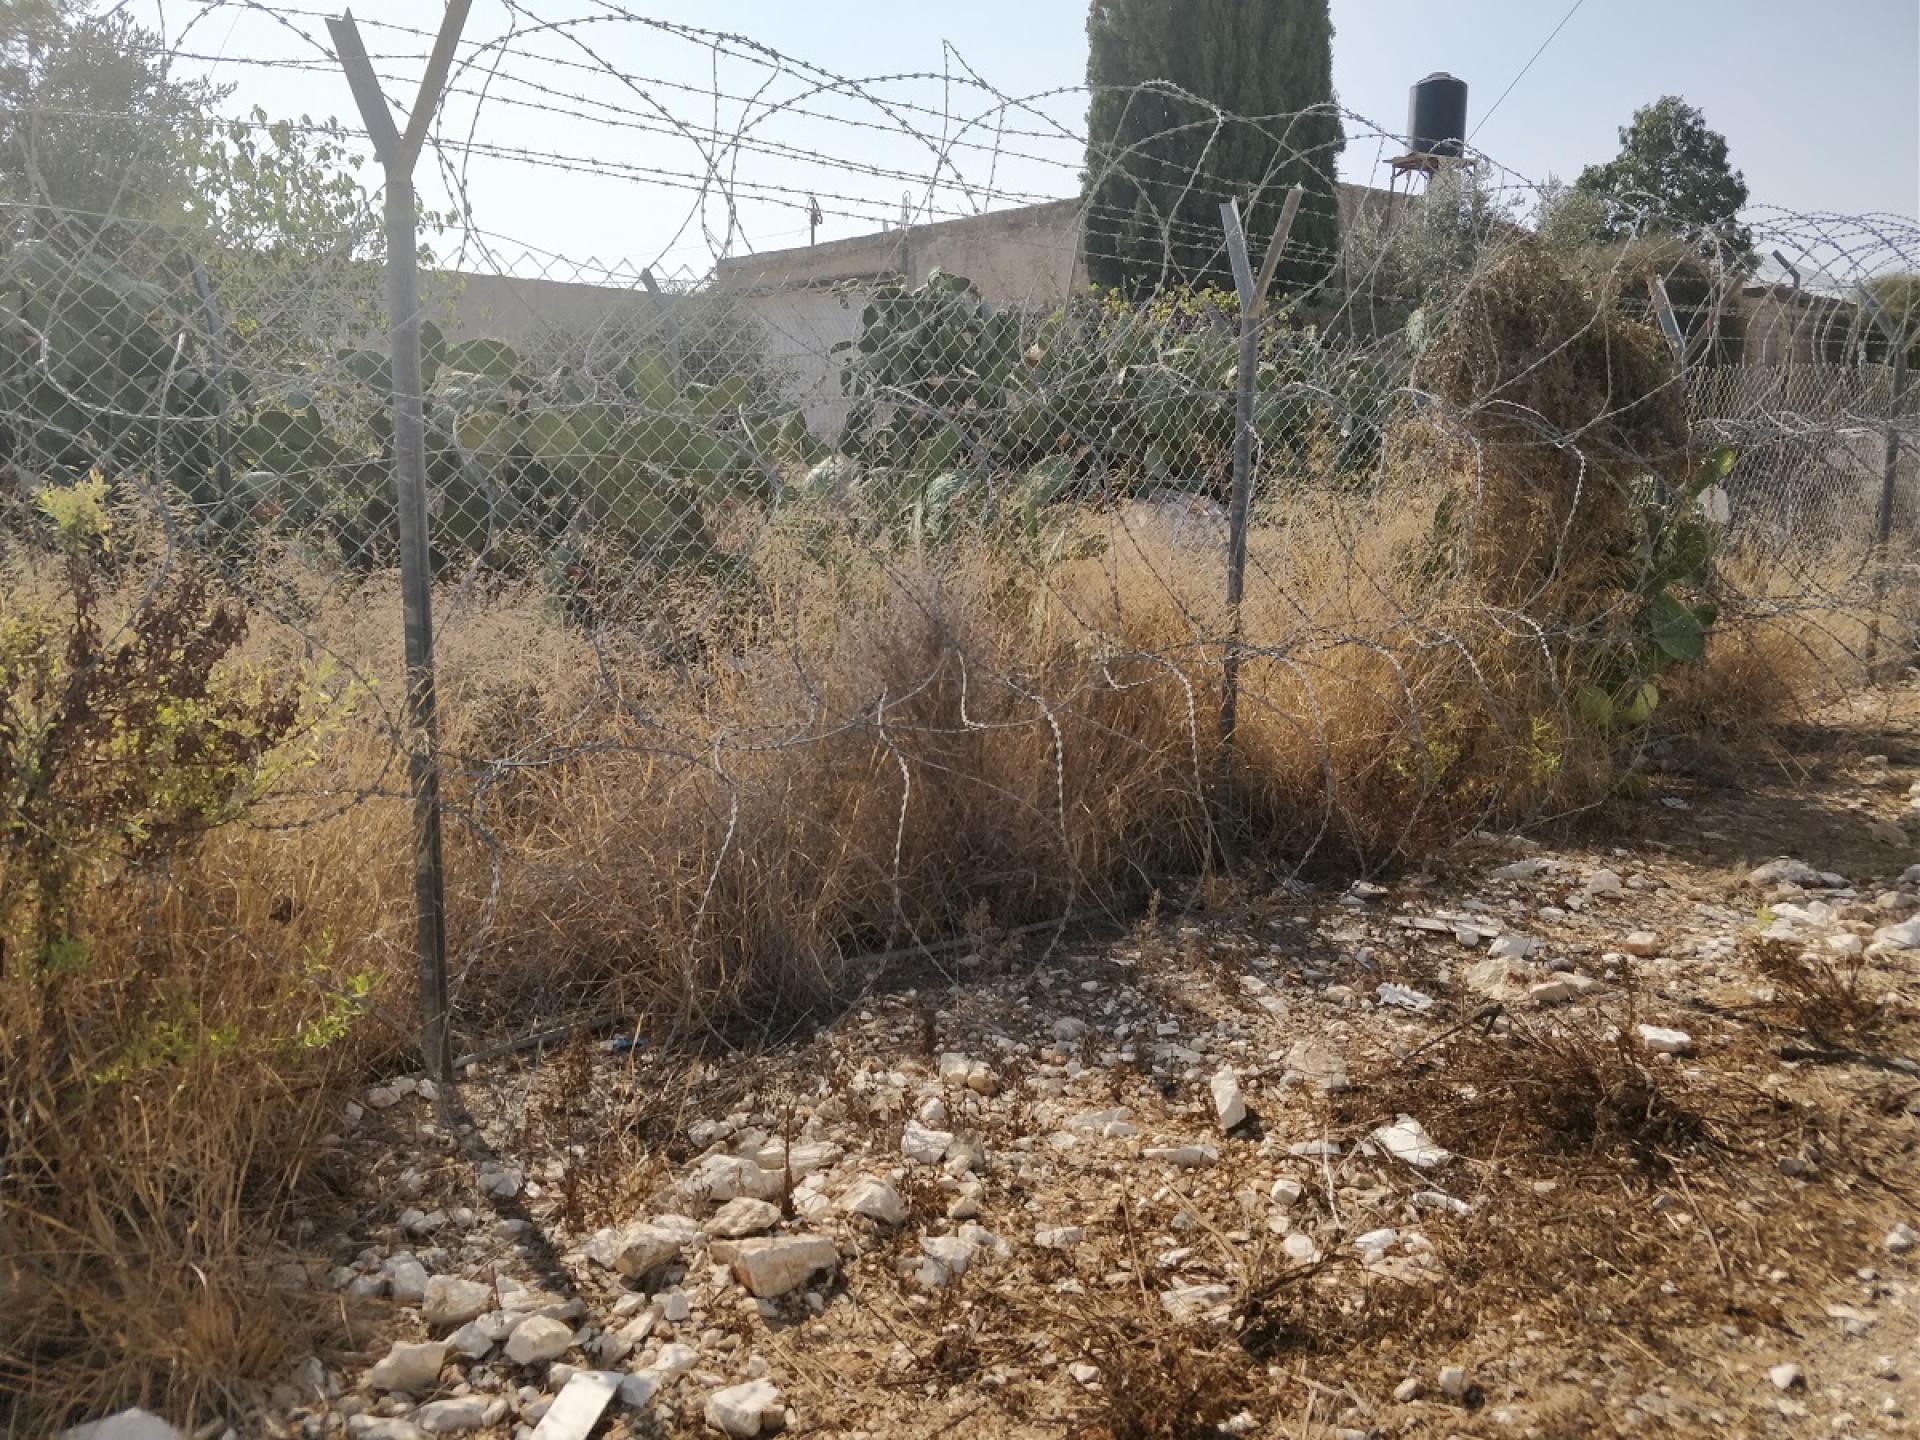 Near the Elkana settler-colony: Hani’s house surrounded with barbed wire fences and high concrete wall